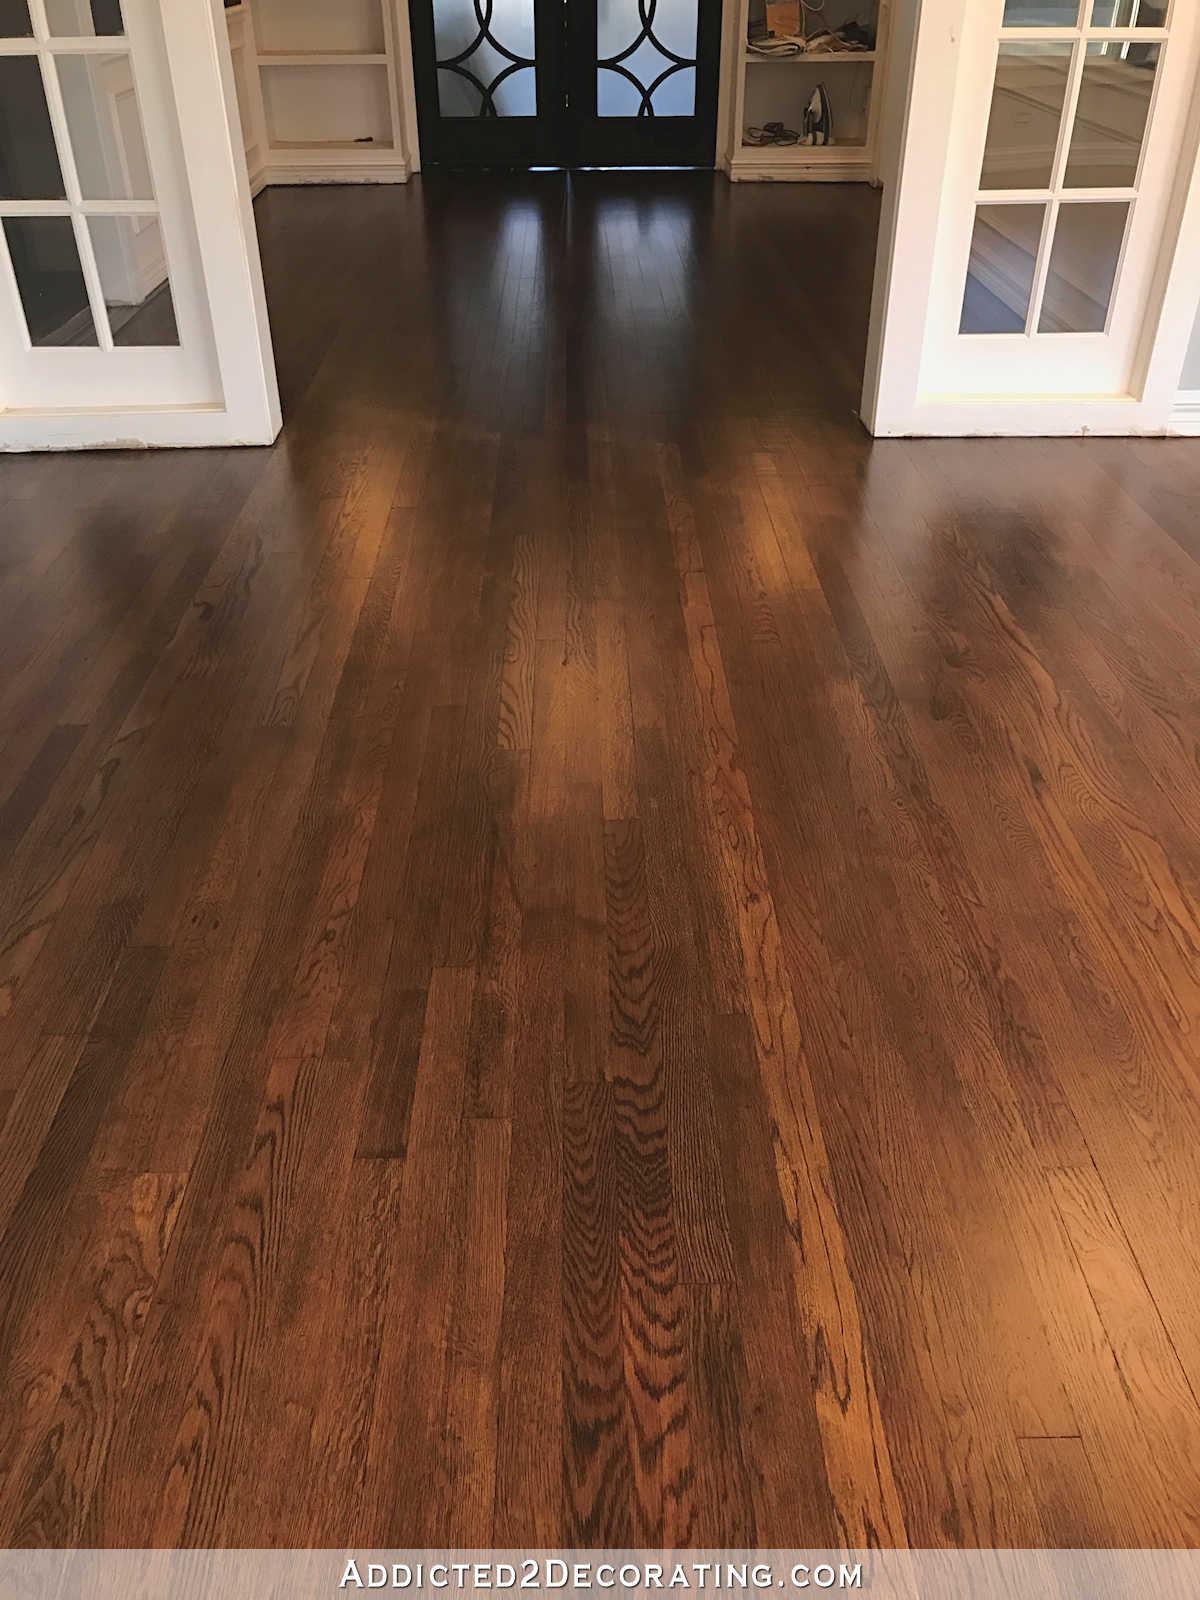 refinished red oak hardwood floors - entryway and music room